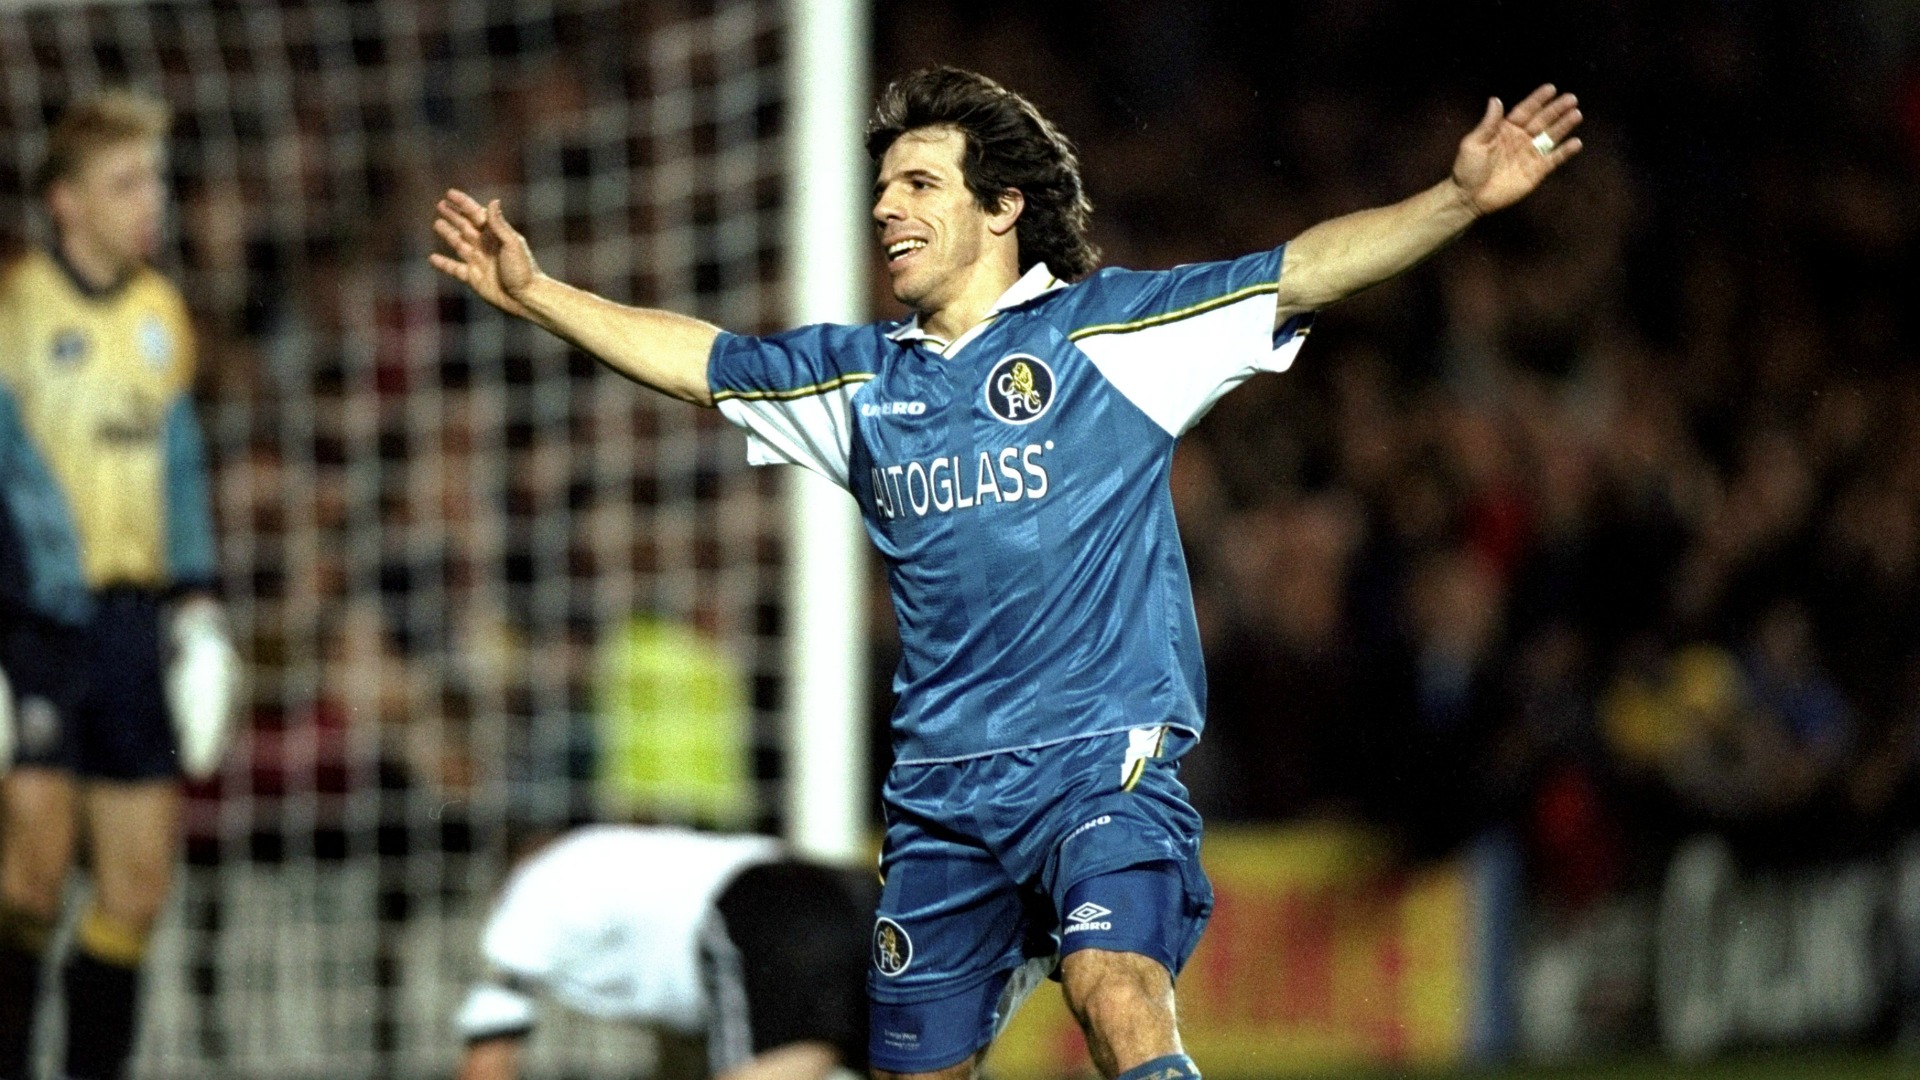 Zola: Frank Lampard would make a great manager and Chelsea are becoming like early 2000s AC Milan